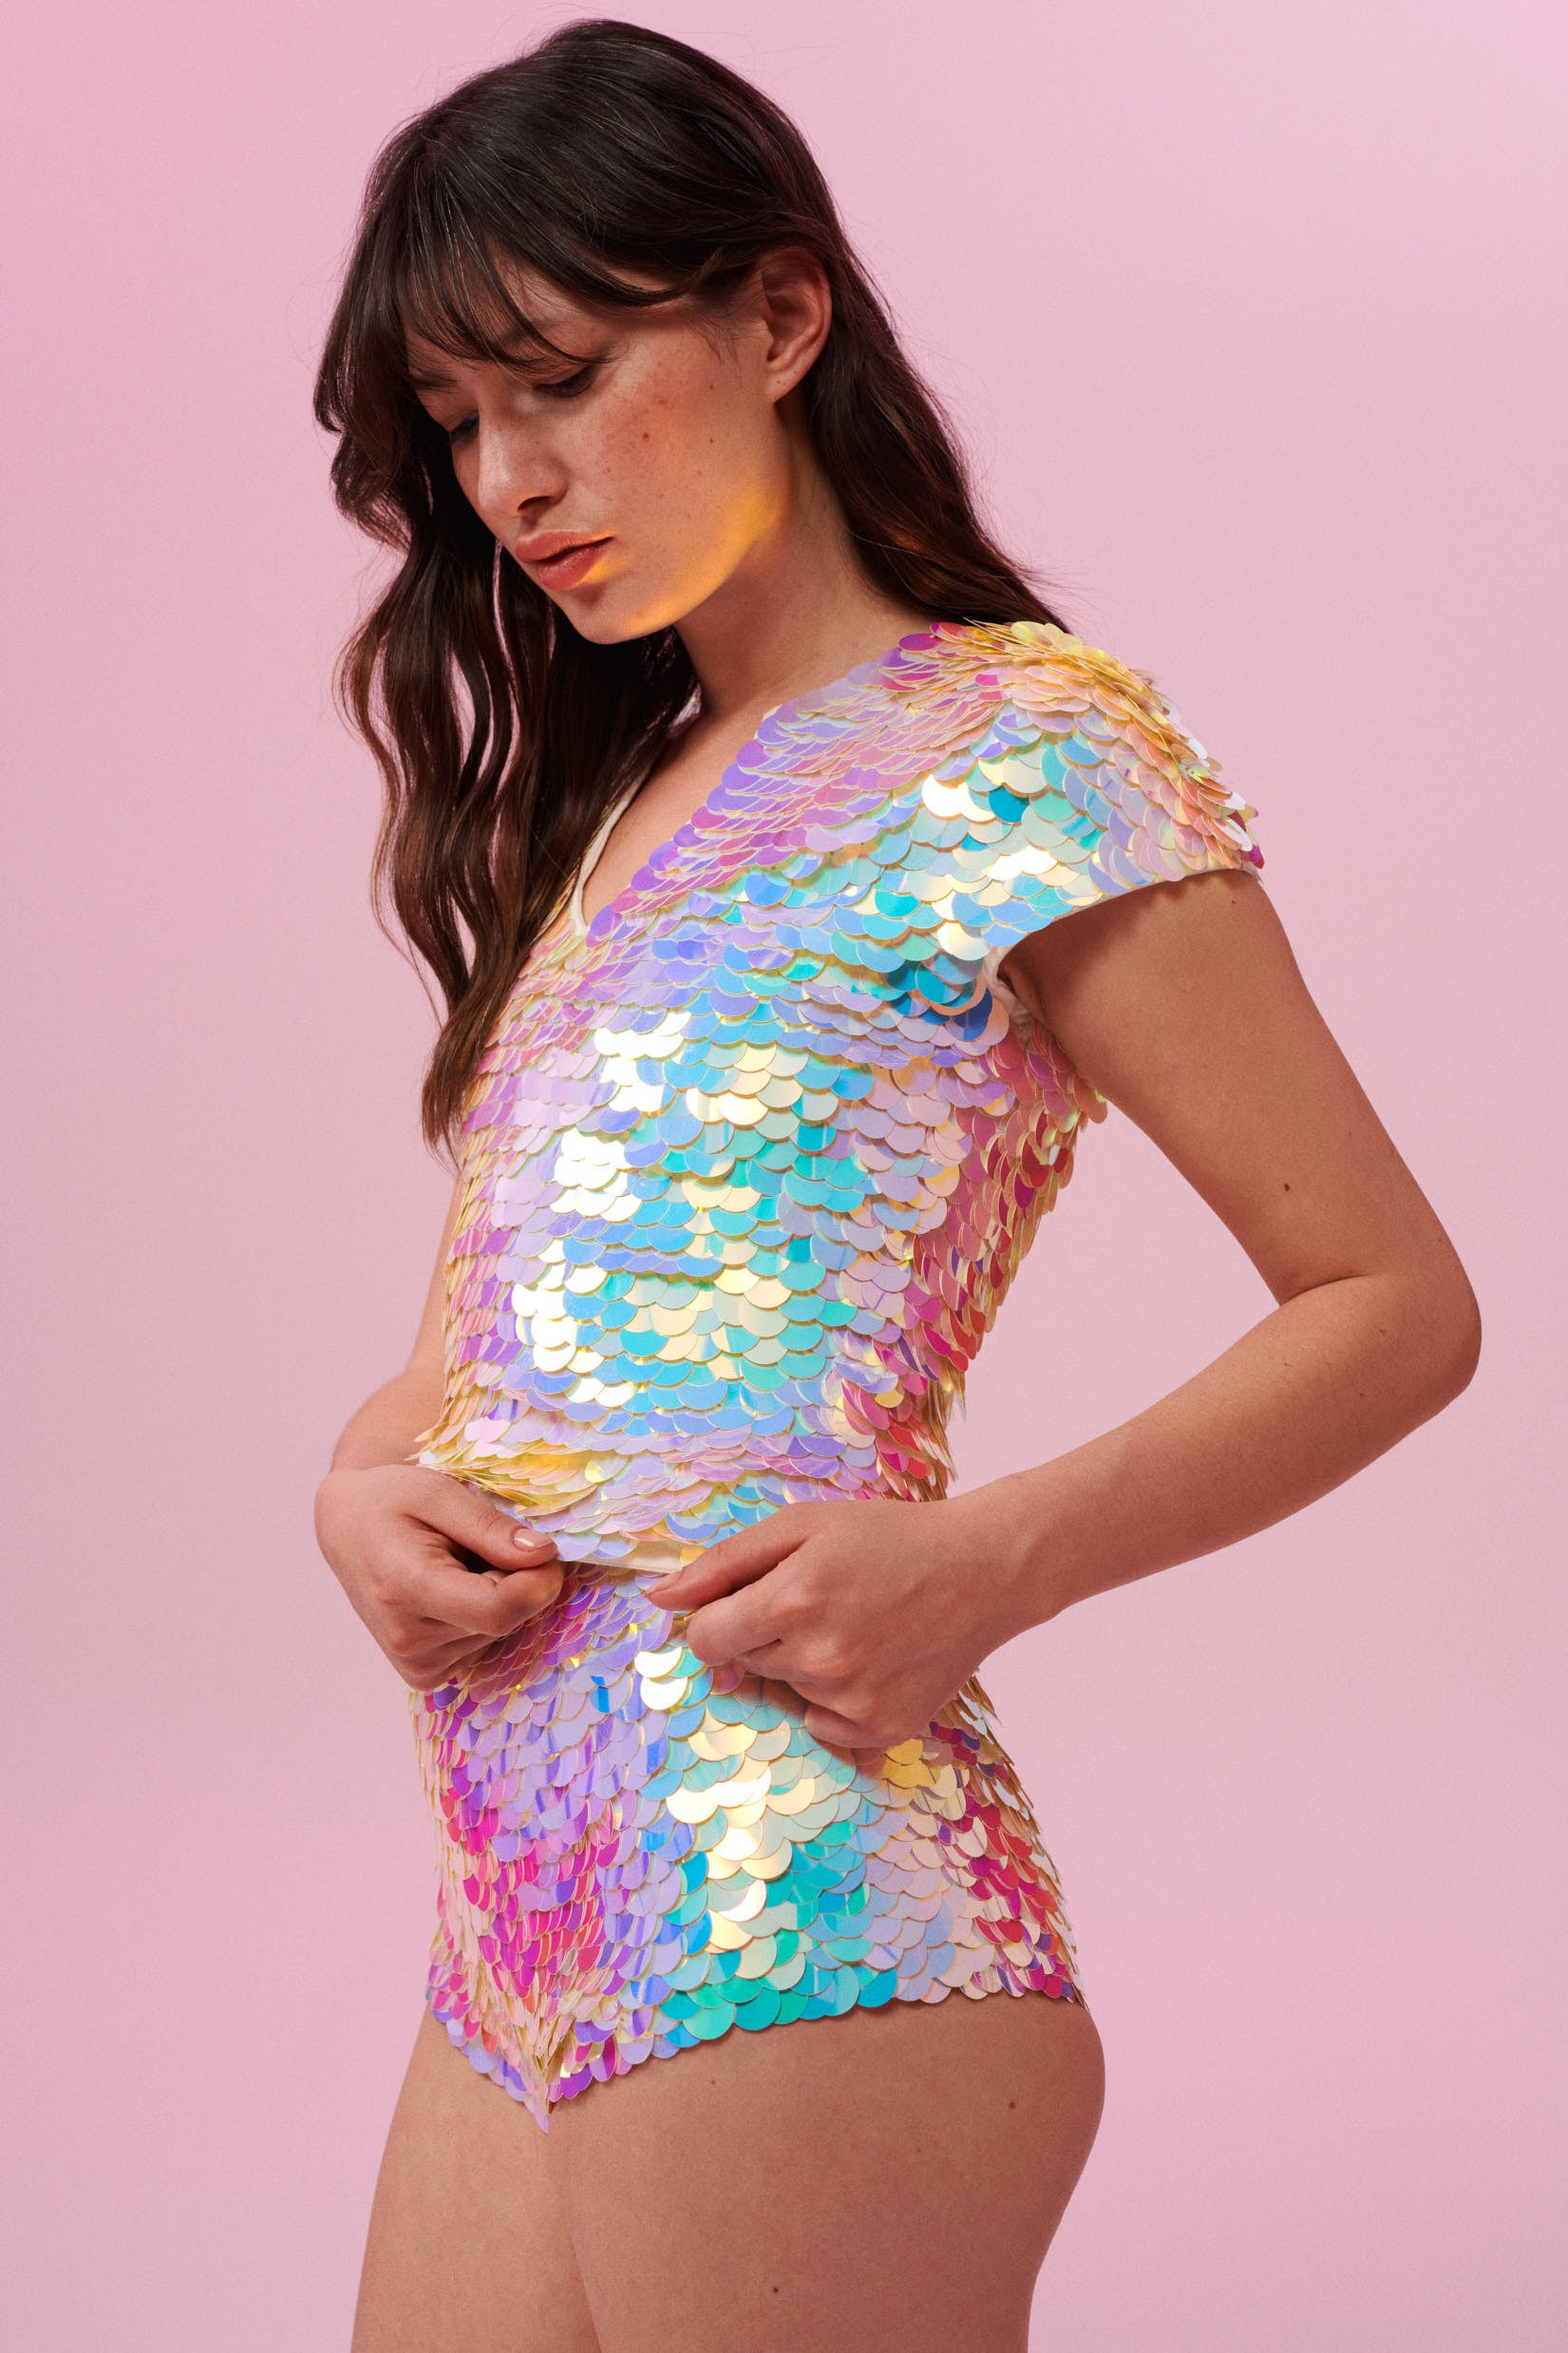 A side on view of a woman with brown hair, wearing a sequin stretchy top with capped sleeves made with large round holographic Rosa Bloom sequins. The Gwen sequins glisten, creating a mix of shimmering colours of soft gold, aqua, lilac, and peach. The model is also wearing matching high waisted, stretchy festival sequin shorts in the same matching sequin colour way.